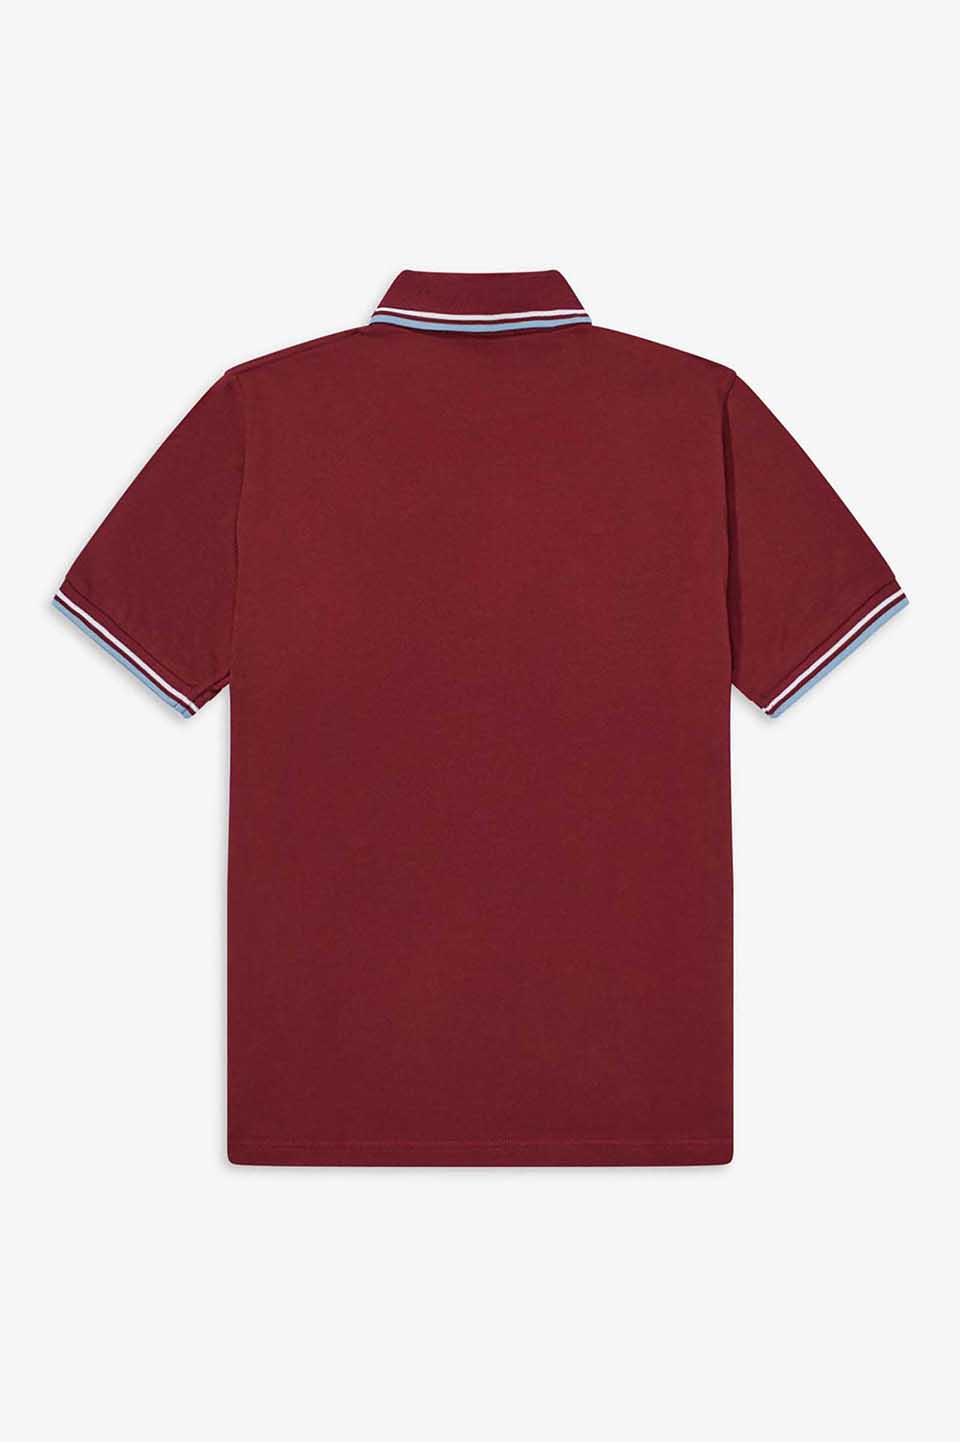 The Fred Perry Shirt - M12(36 106：MAROON / WHITE / ICE): | FRED PERRY ...